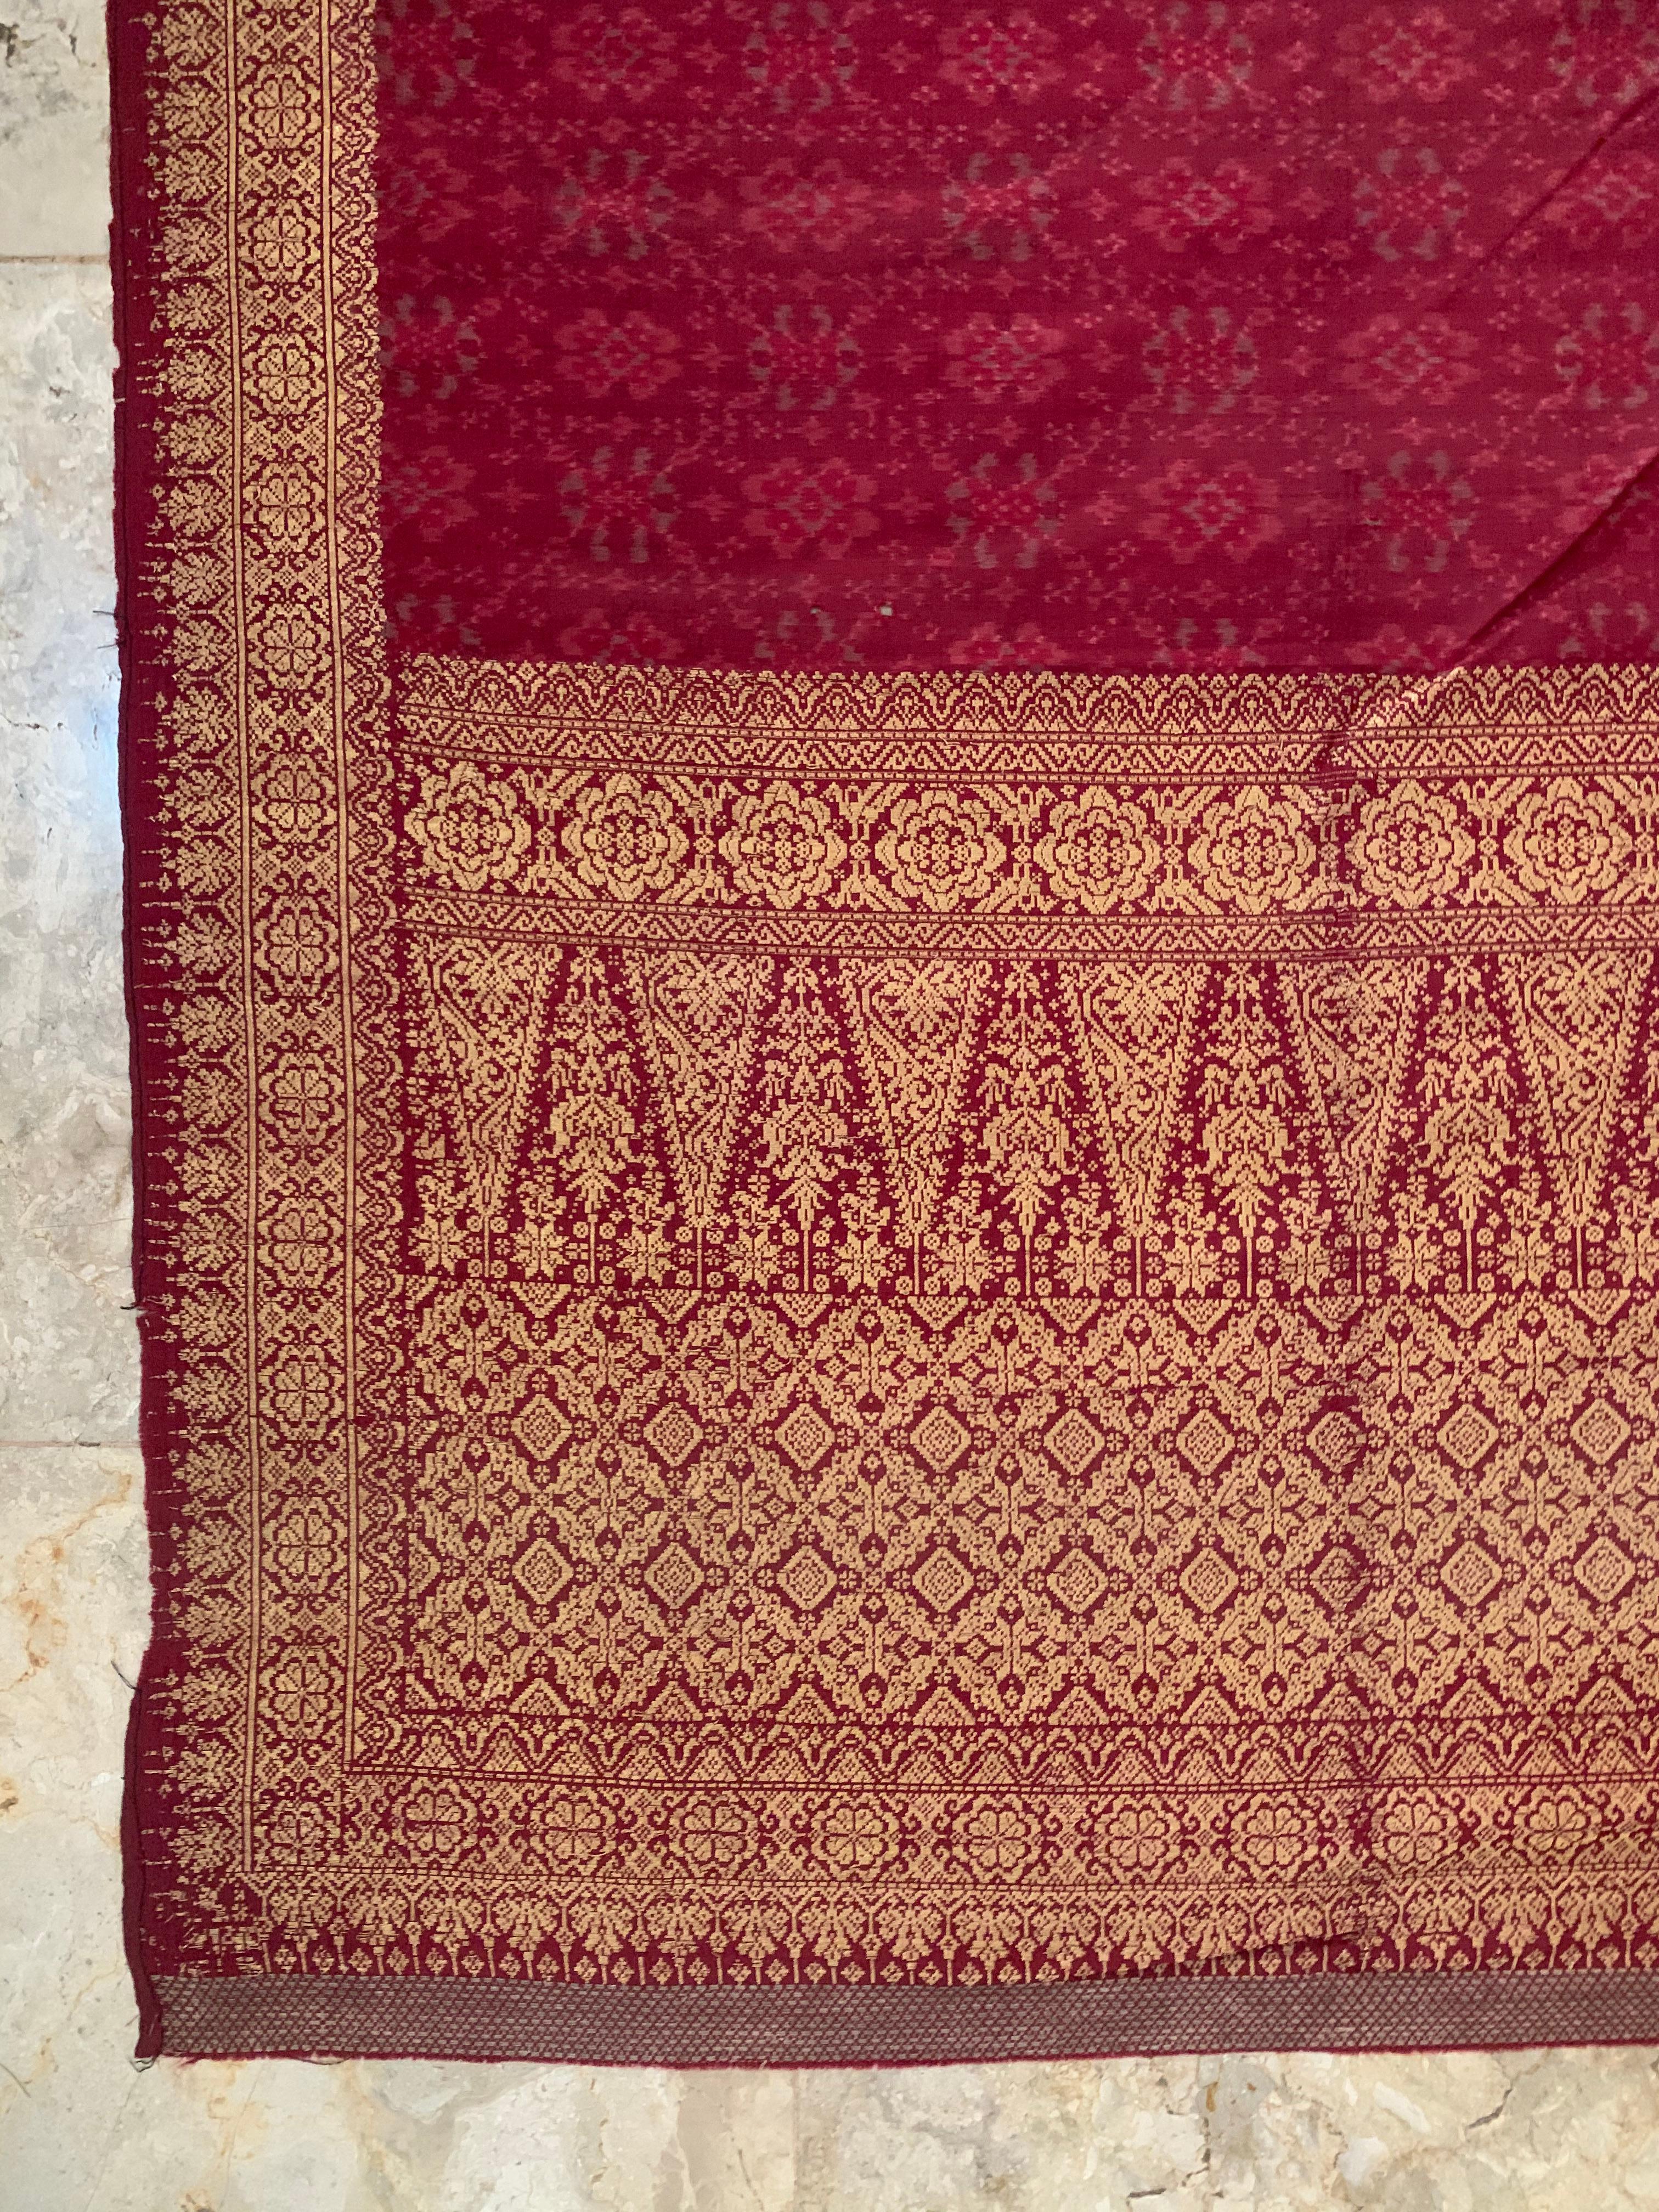 A wonderful and rare example of a Palembang Ceremonial Woven Silk Ikat (Songket Limar) from the Malay people of Sumatra. It features a mix of red & pink silks and a unique process which merges gold leaf to the embroidery. This process involves